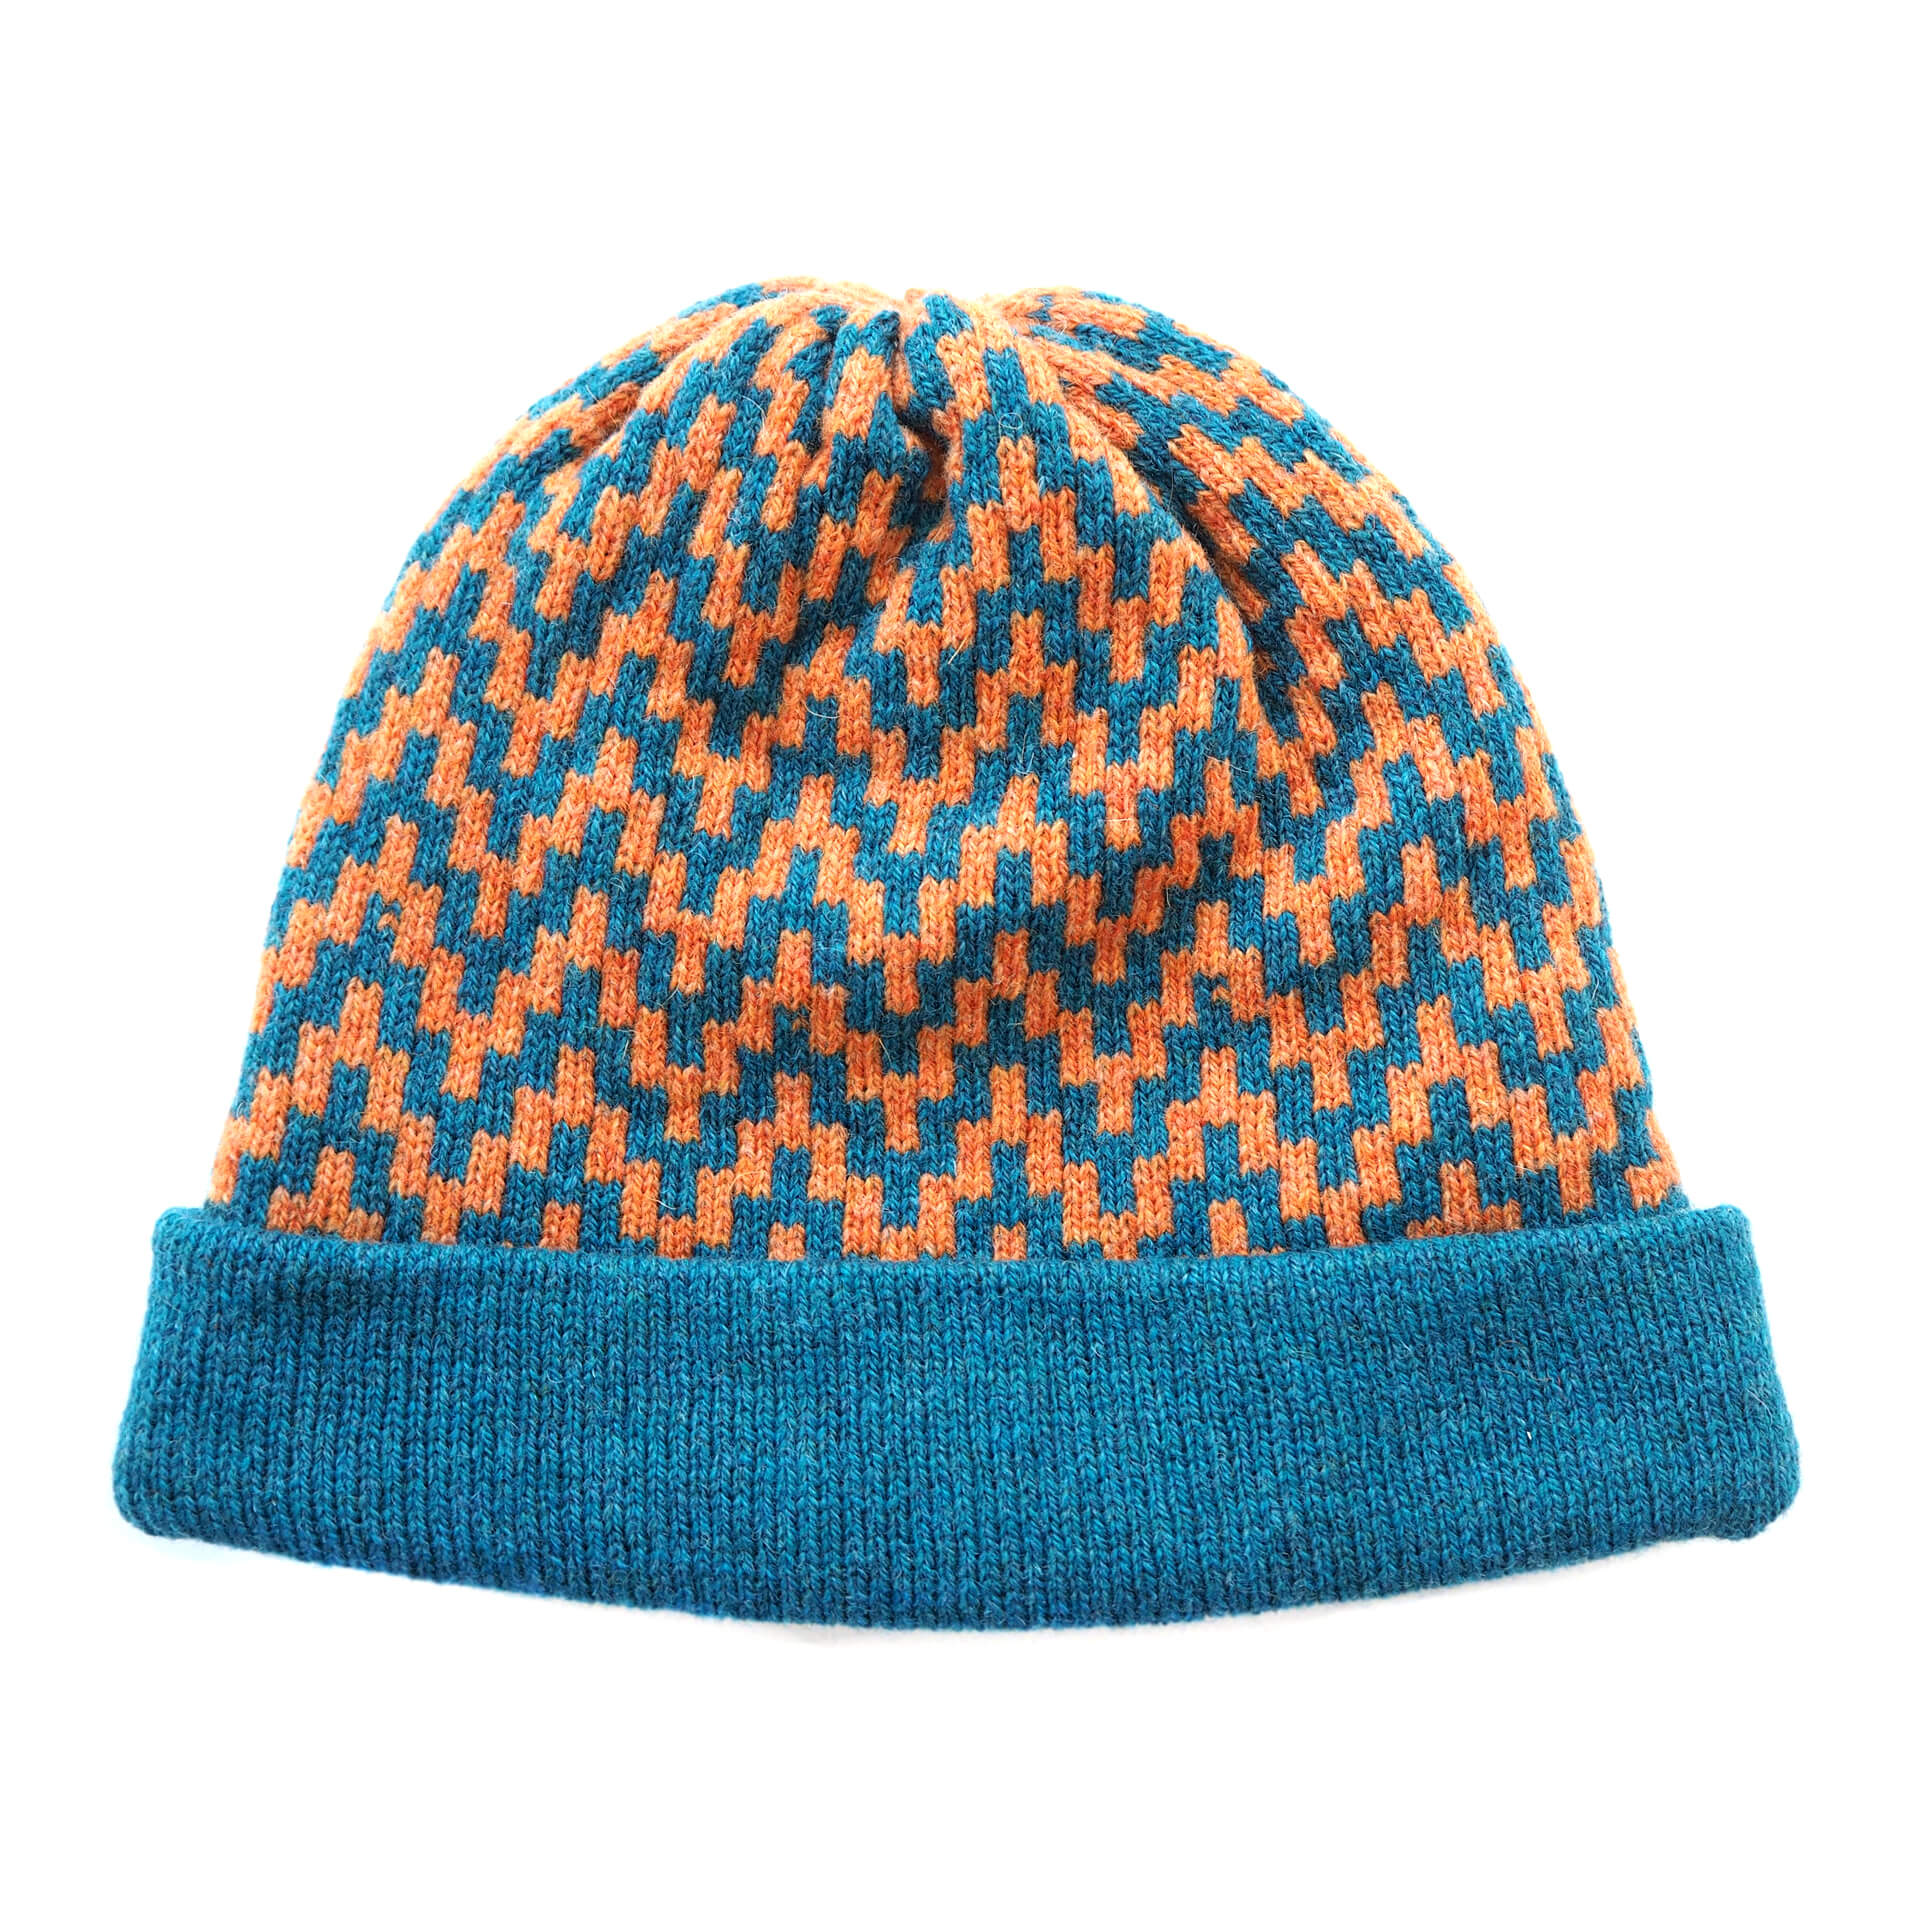 A woollen beanie, with orange and blue zig-zag pattern, and a blue fold up brim, by K.Moods.